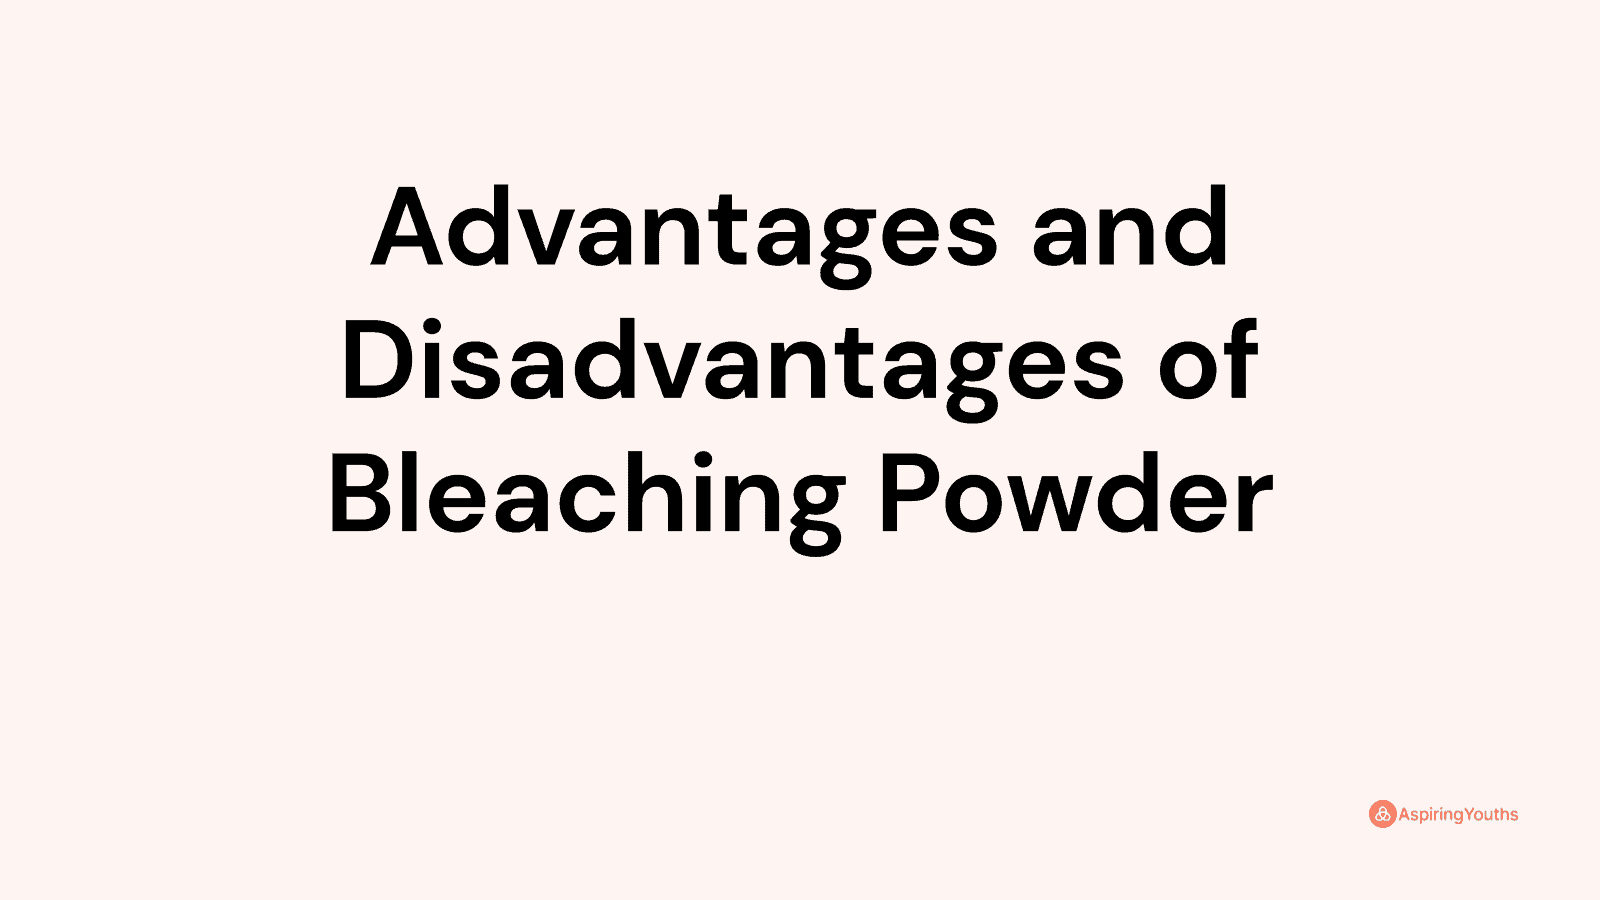 Advantages and disadvantages of Bleaching Powder